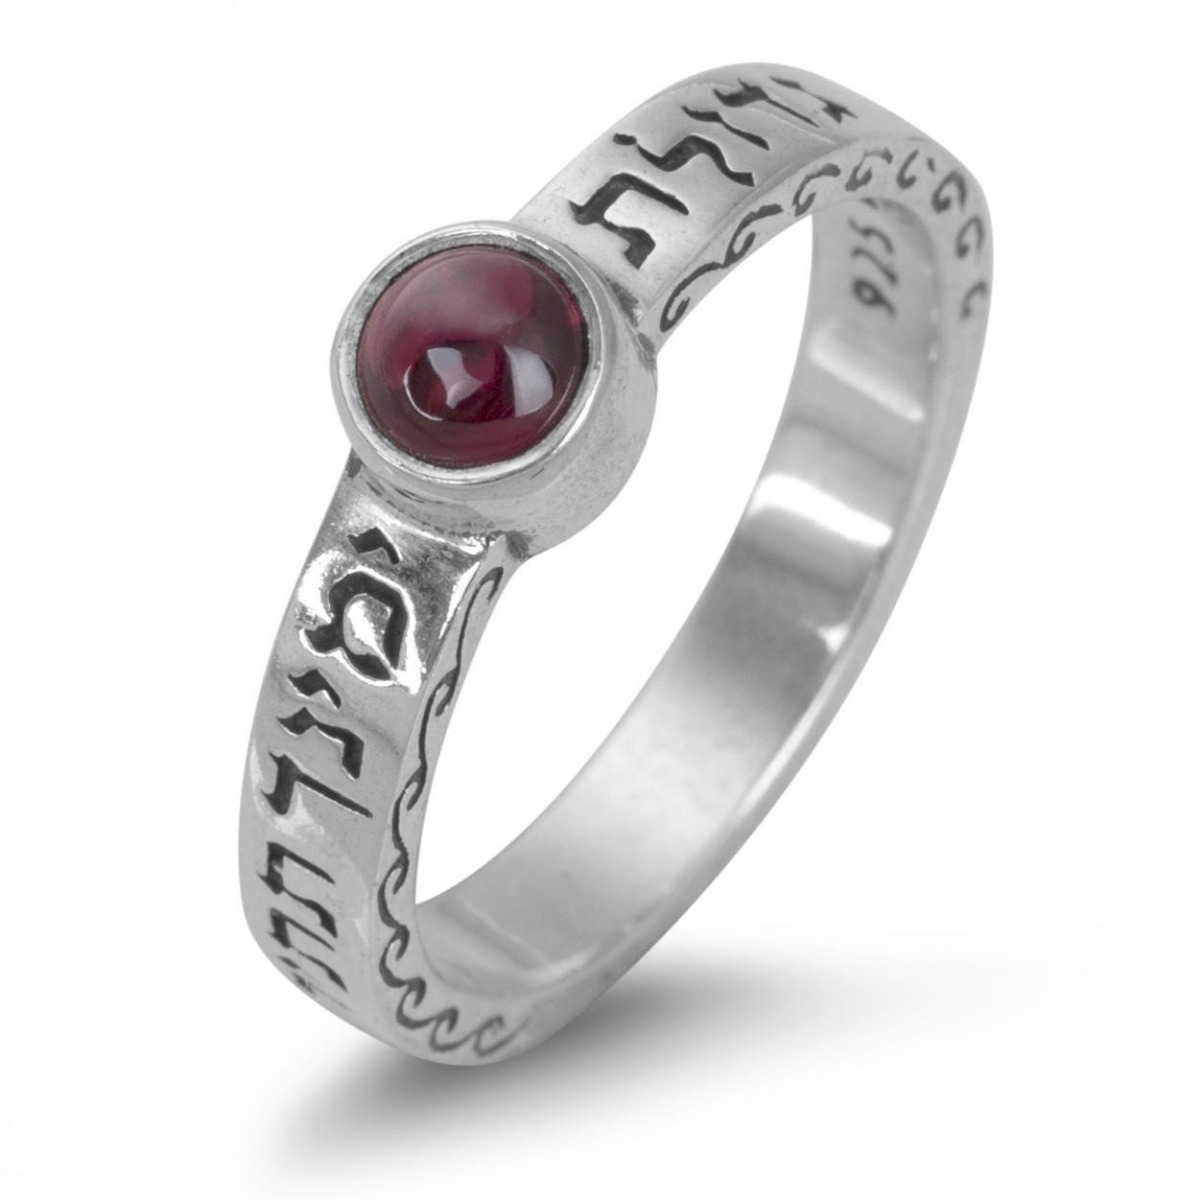 925 Sterling Silver Ring With Garnet And Ana Bekoach (Mystical Prayer) Inscription - 1